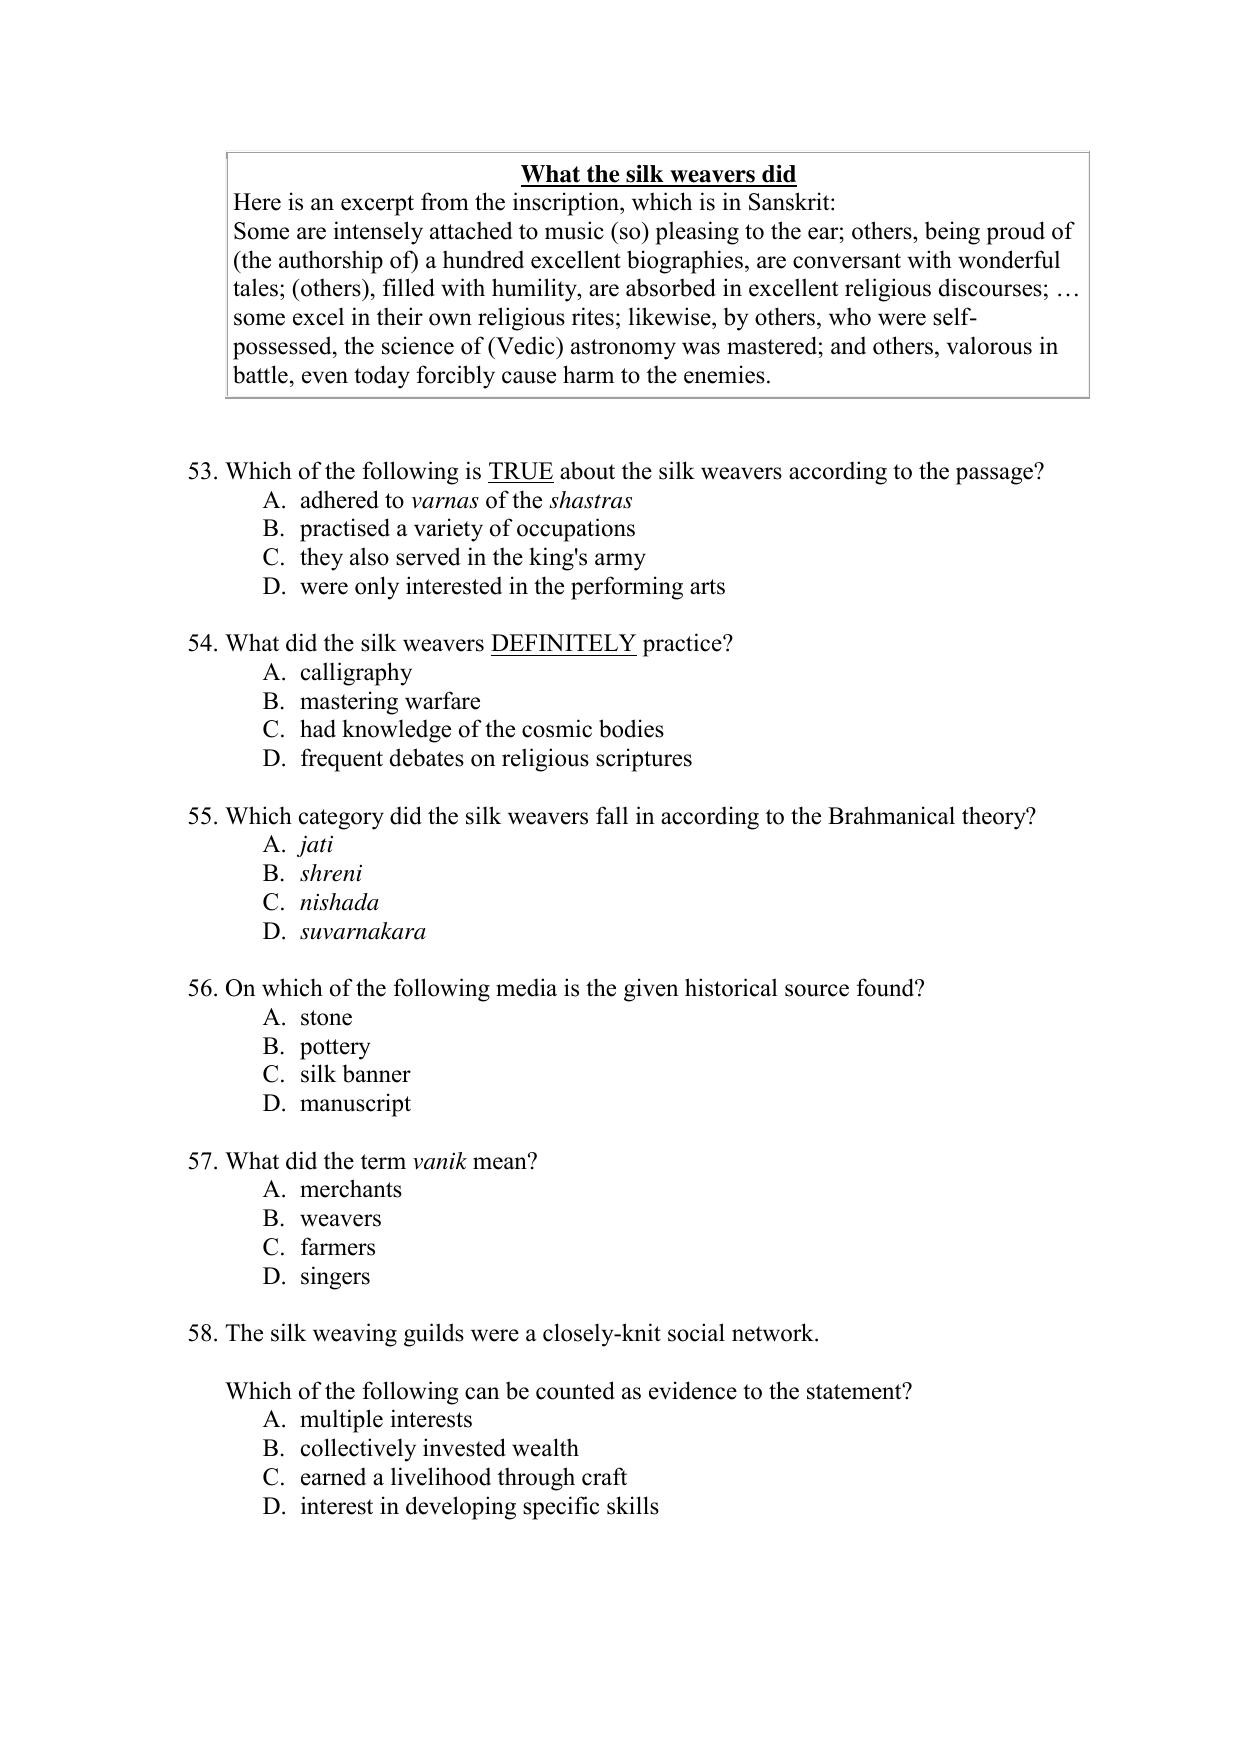 CBSE Class 12 History Term 1 Practice Questions 2021-22 - Page 11